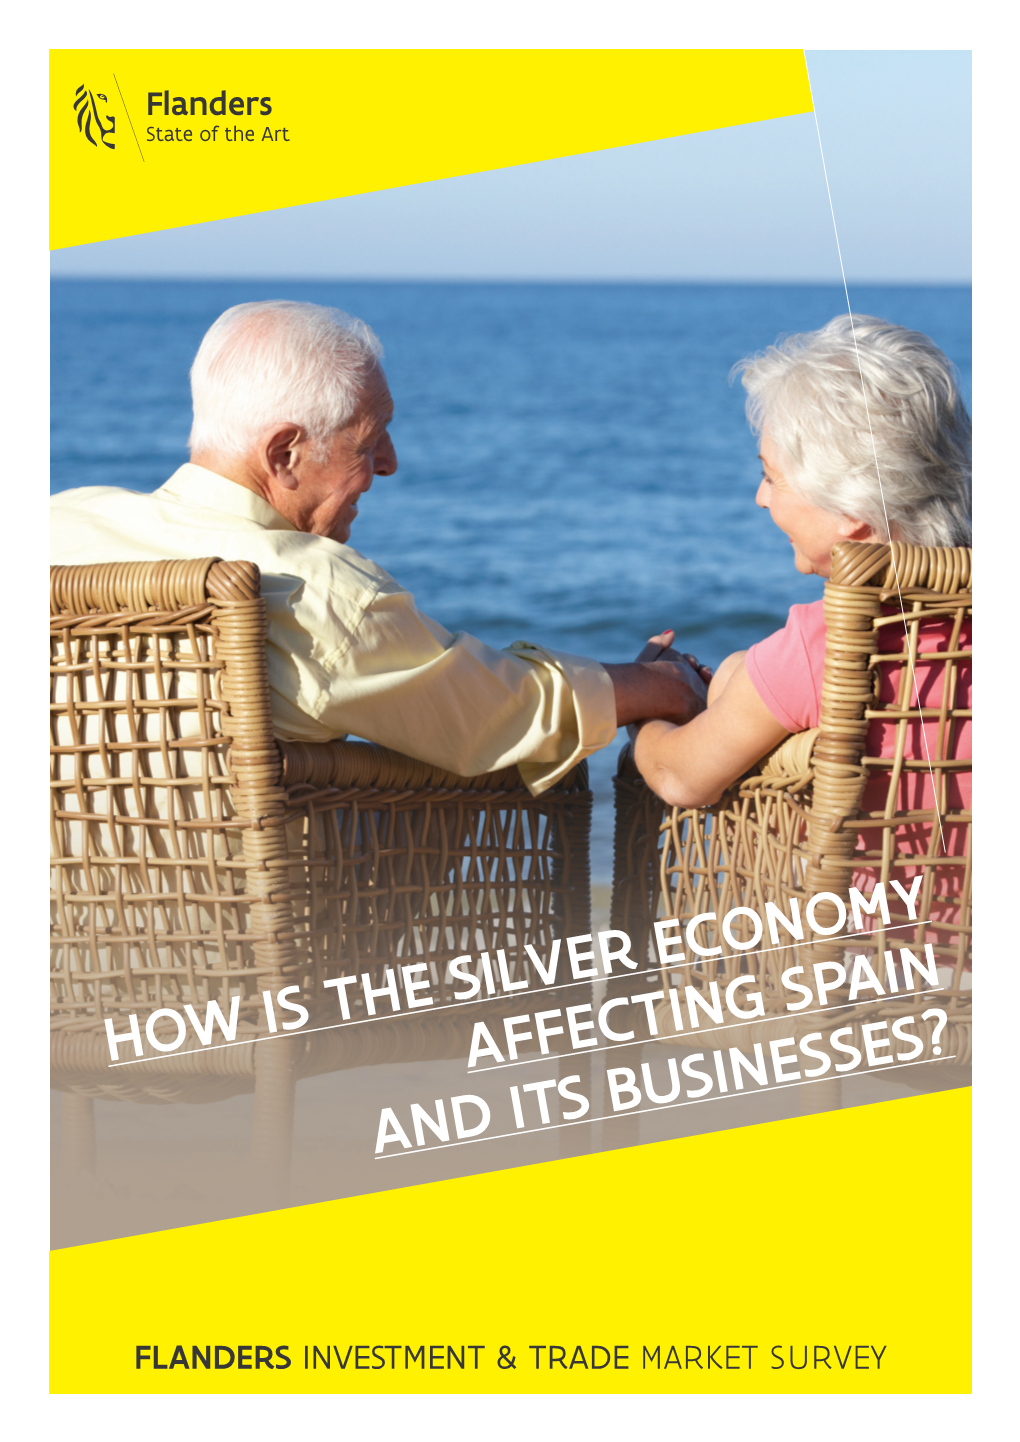 How Is the Silver Economy Affecting Spain and Its Businesses?